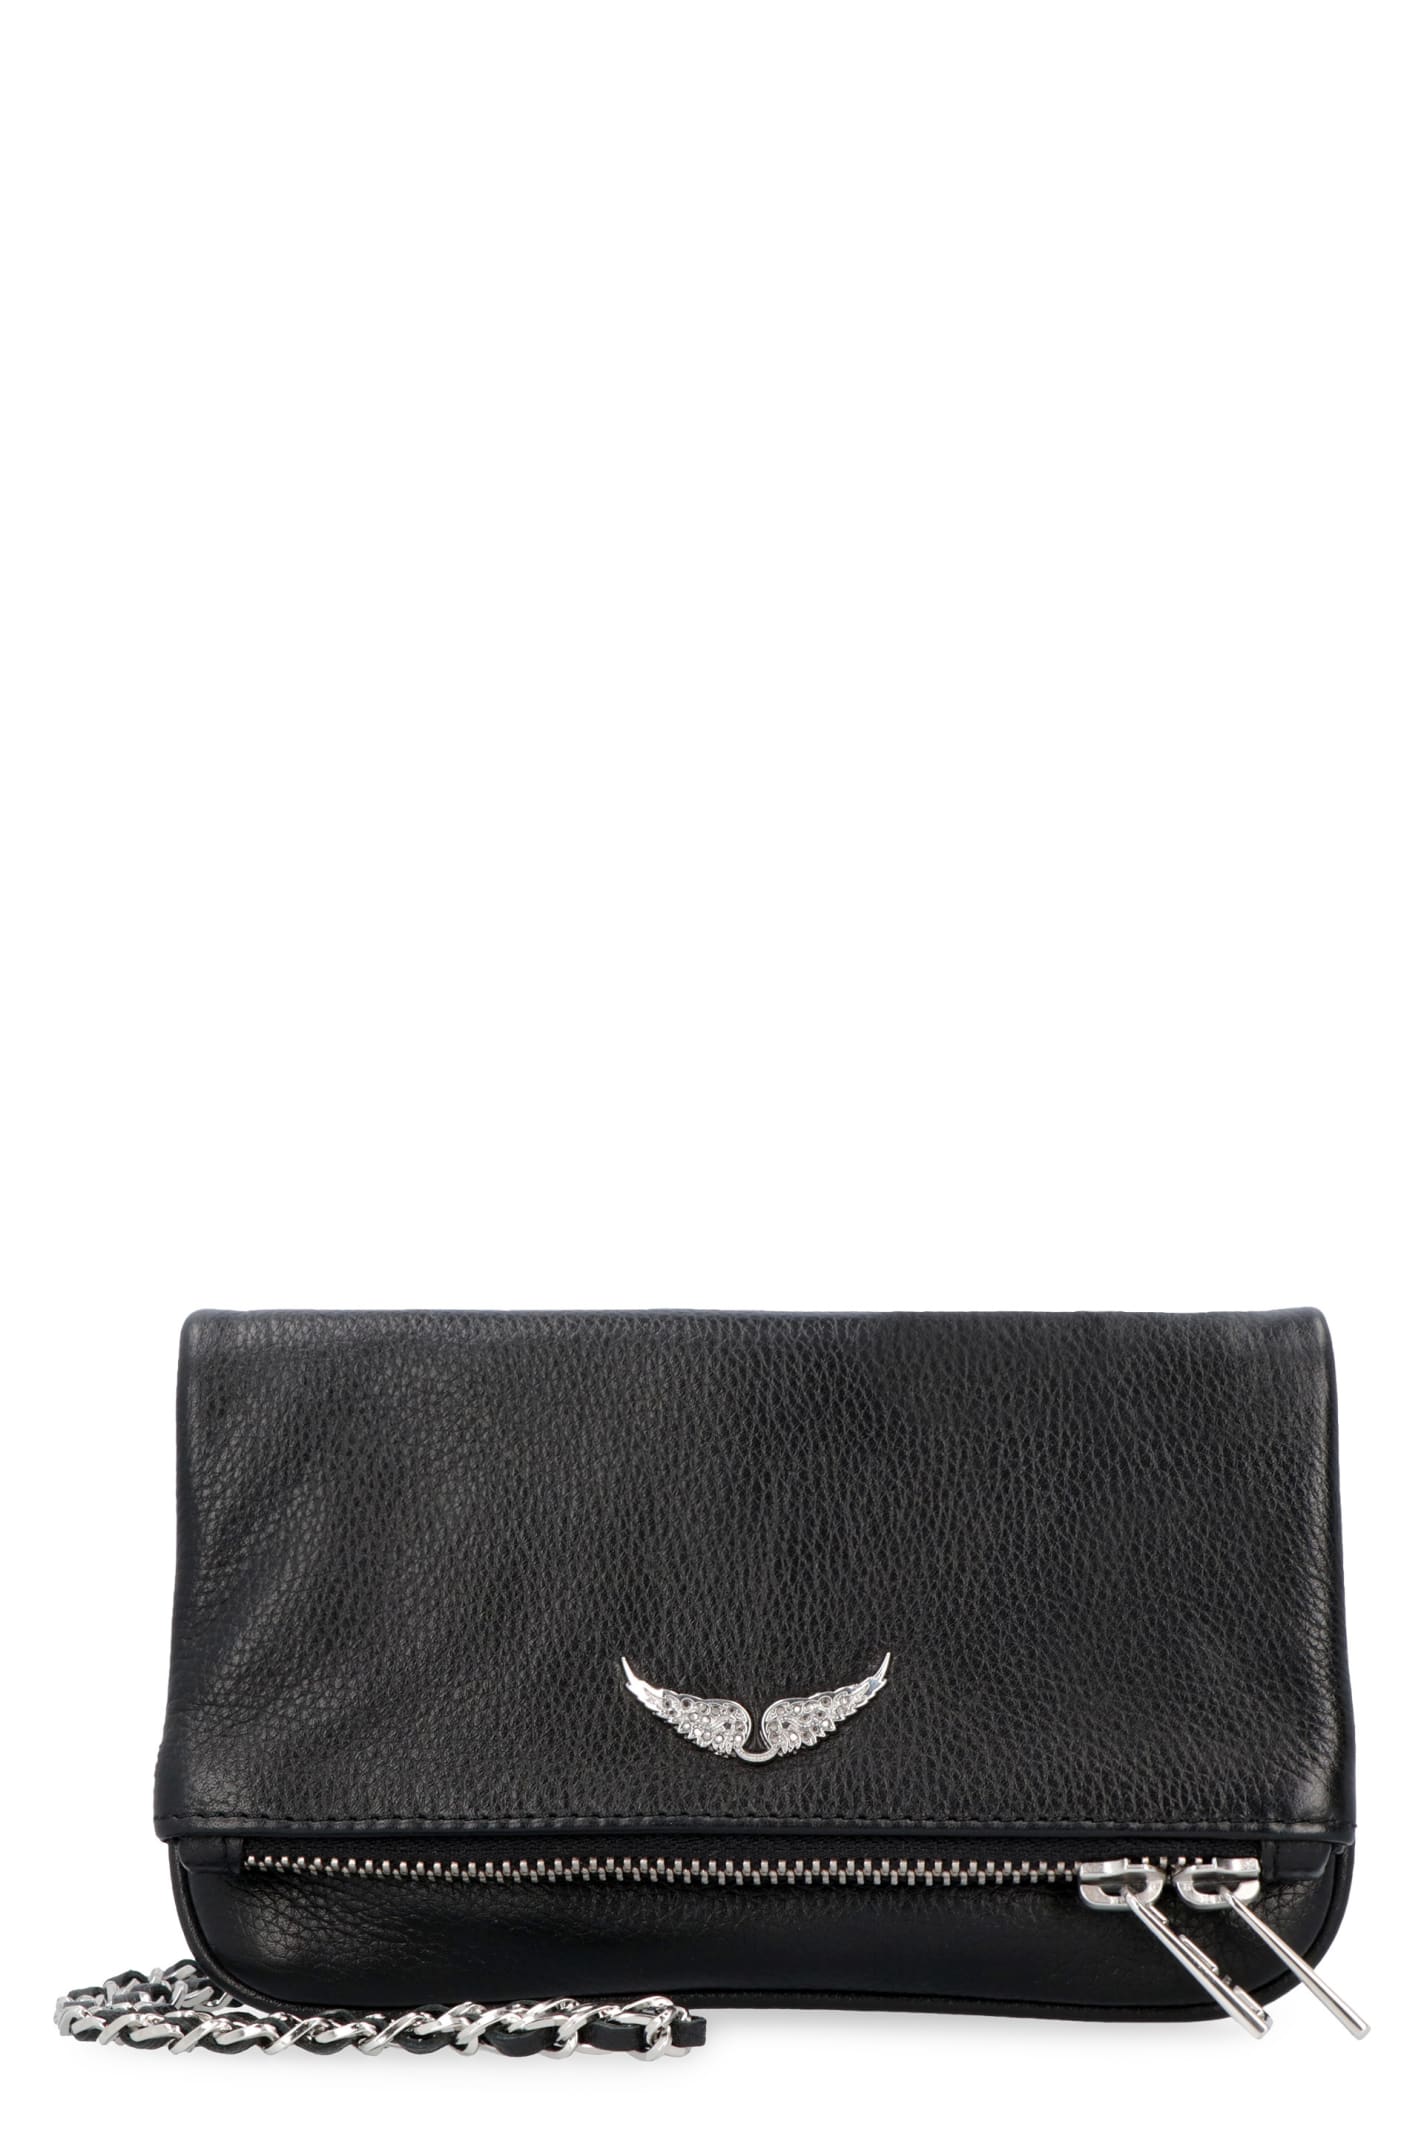 Zadig & Voltaire Rock Nano Pebbled Leather Clutch